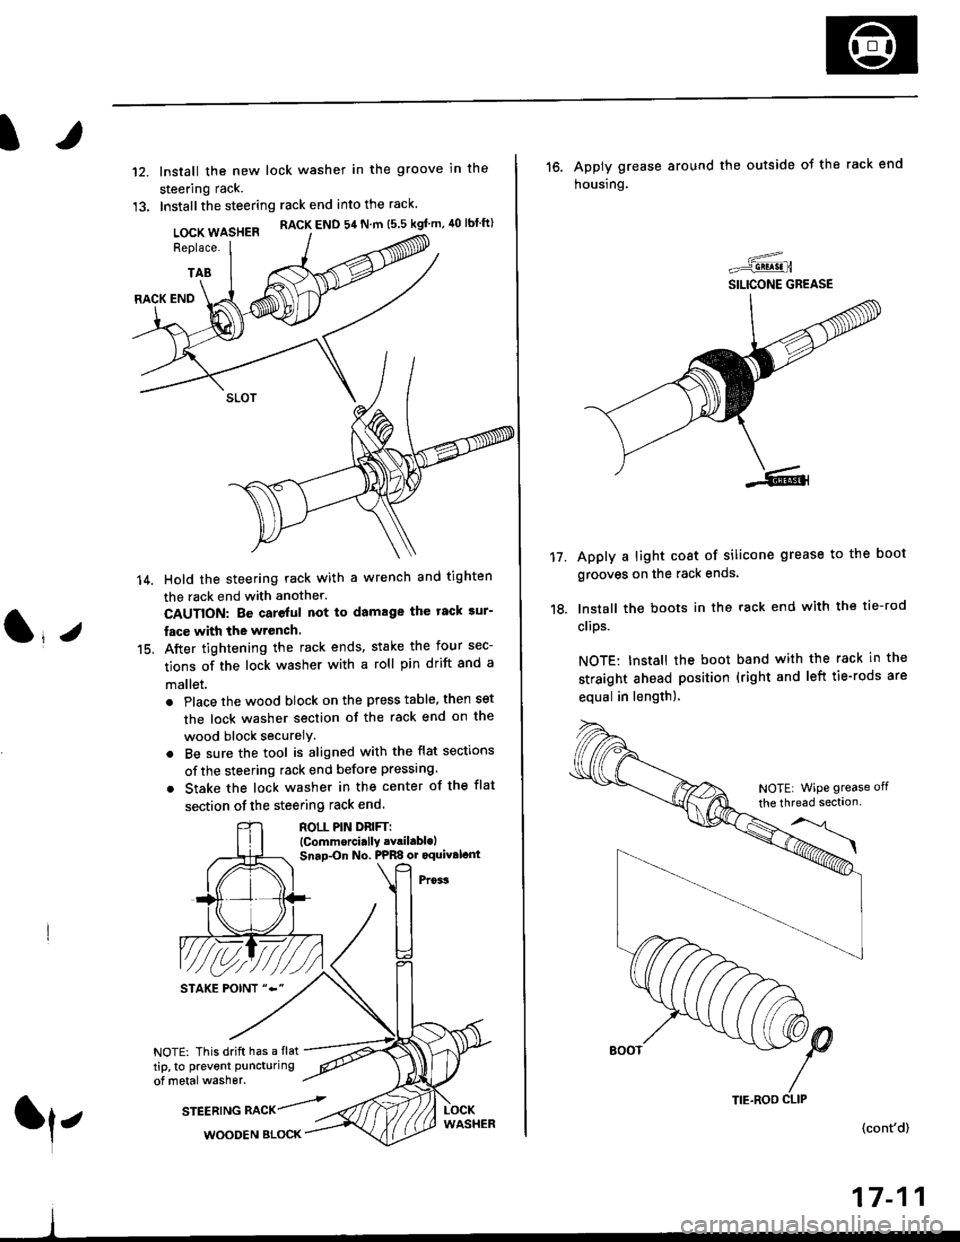 HONDA CIVIC 1996 6.G Service Manual It
12.
13.
lnstall the new lock washer in the groove in the
steering rack.
Installthe steering rack end into the rack
LOCK WASHER RACK END 54 N m ts.s kgfm, 40 lbtft)
Replace.
TAB
(l*v
14.
15.
RACK E